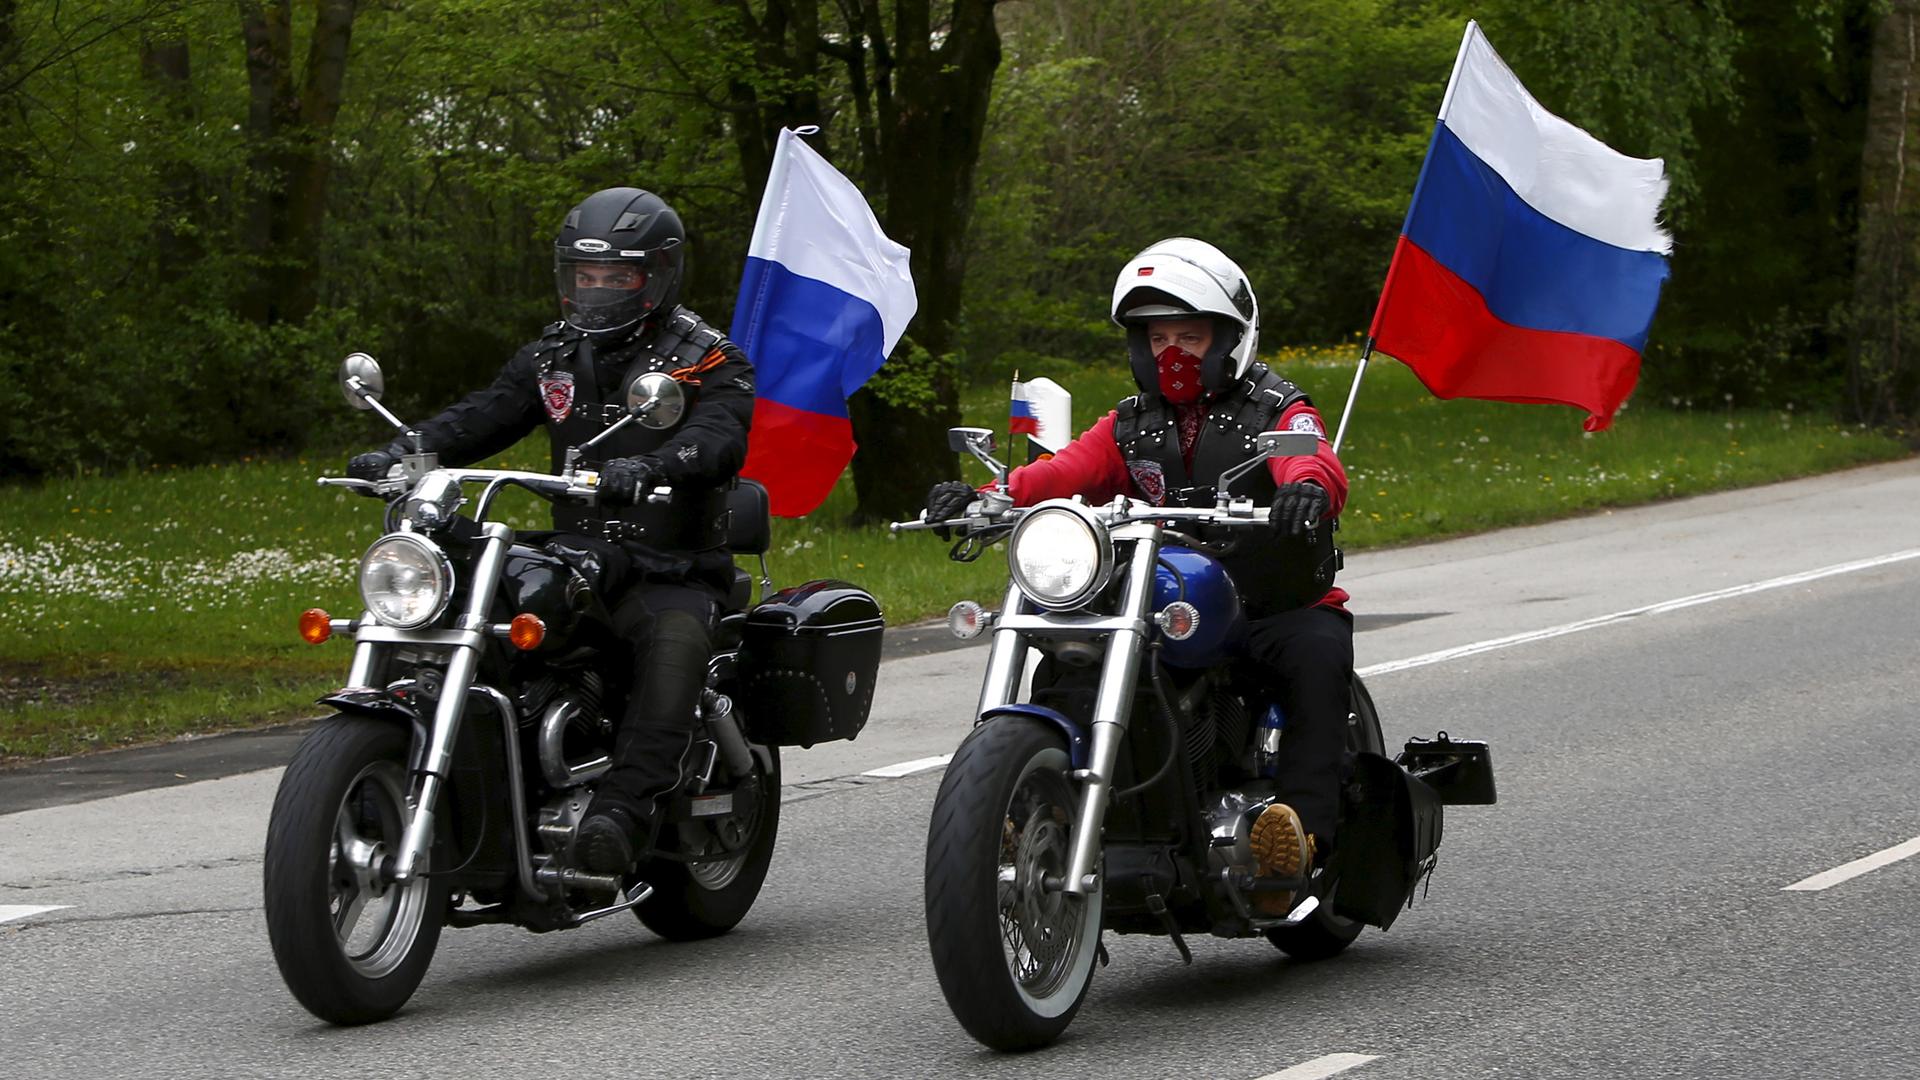 Members of the Russian motorcycle group called 'Nachtwoelfe' (Night Wolves) arrive at the former German Nazi concentration camp in Dachau near Munich, Germany May 4, 2015.